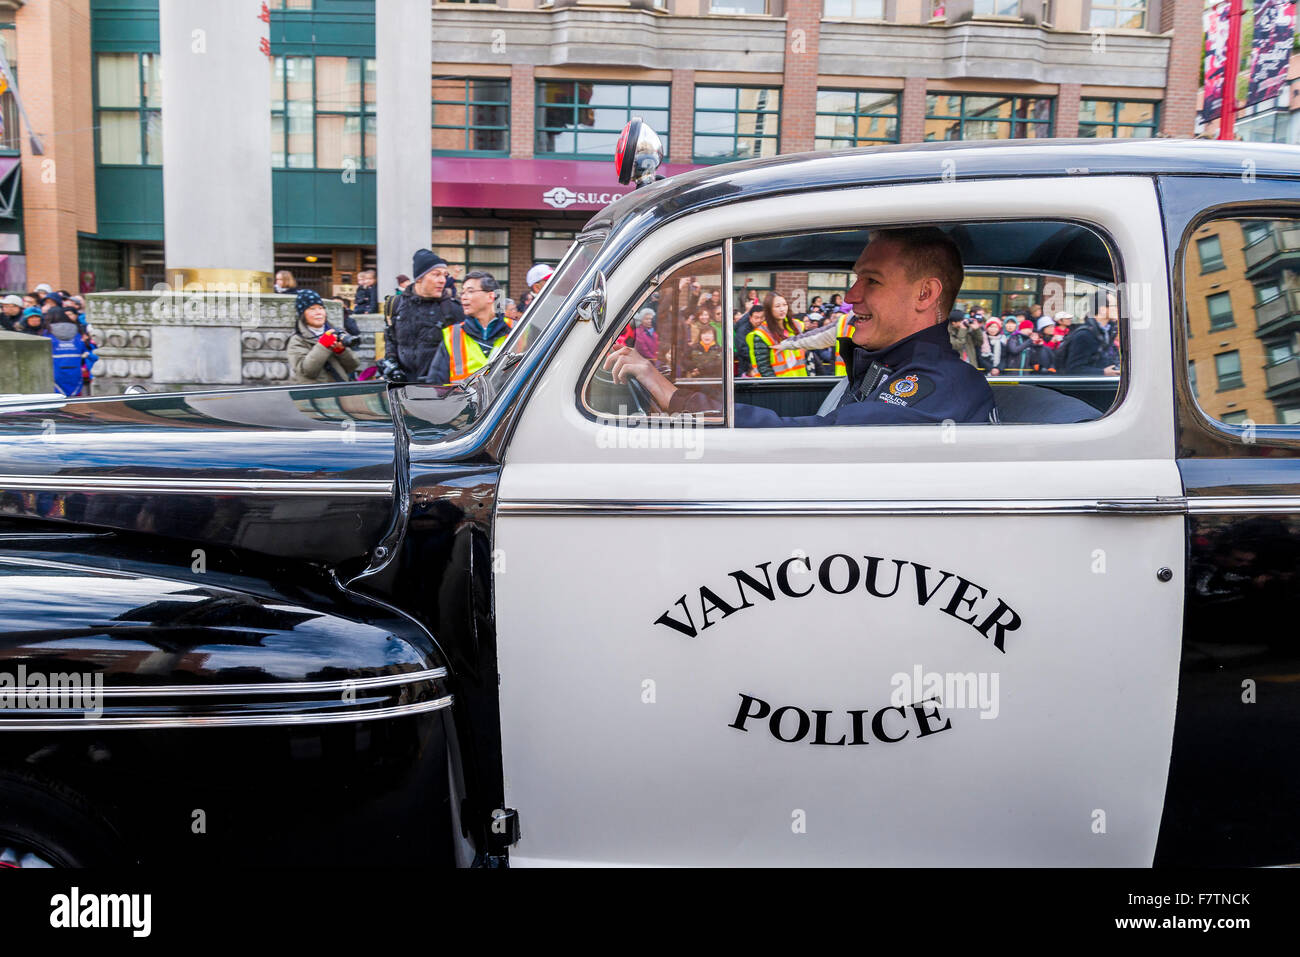 Gallery: 2nd Annual Vintage Police Cruiser Show